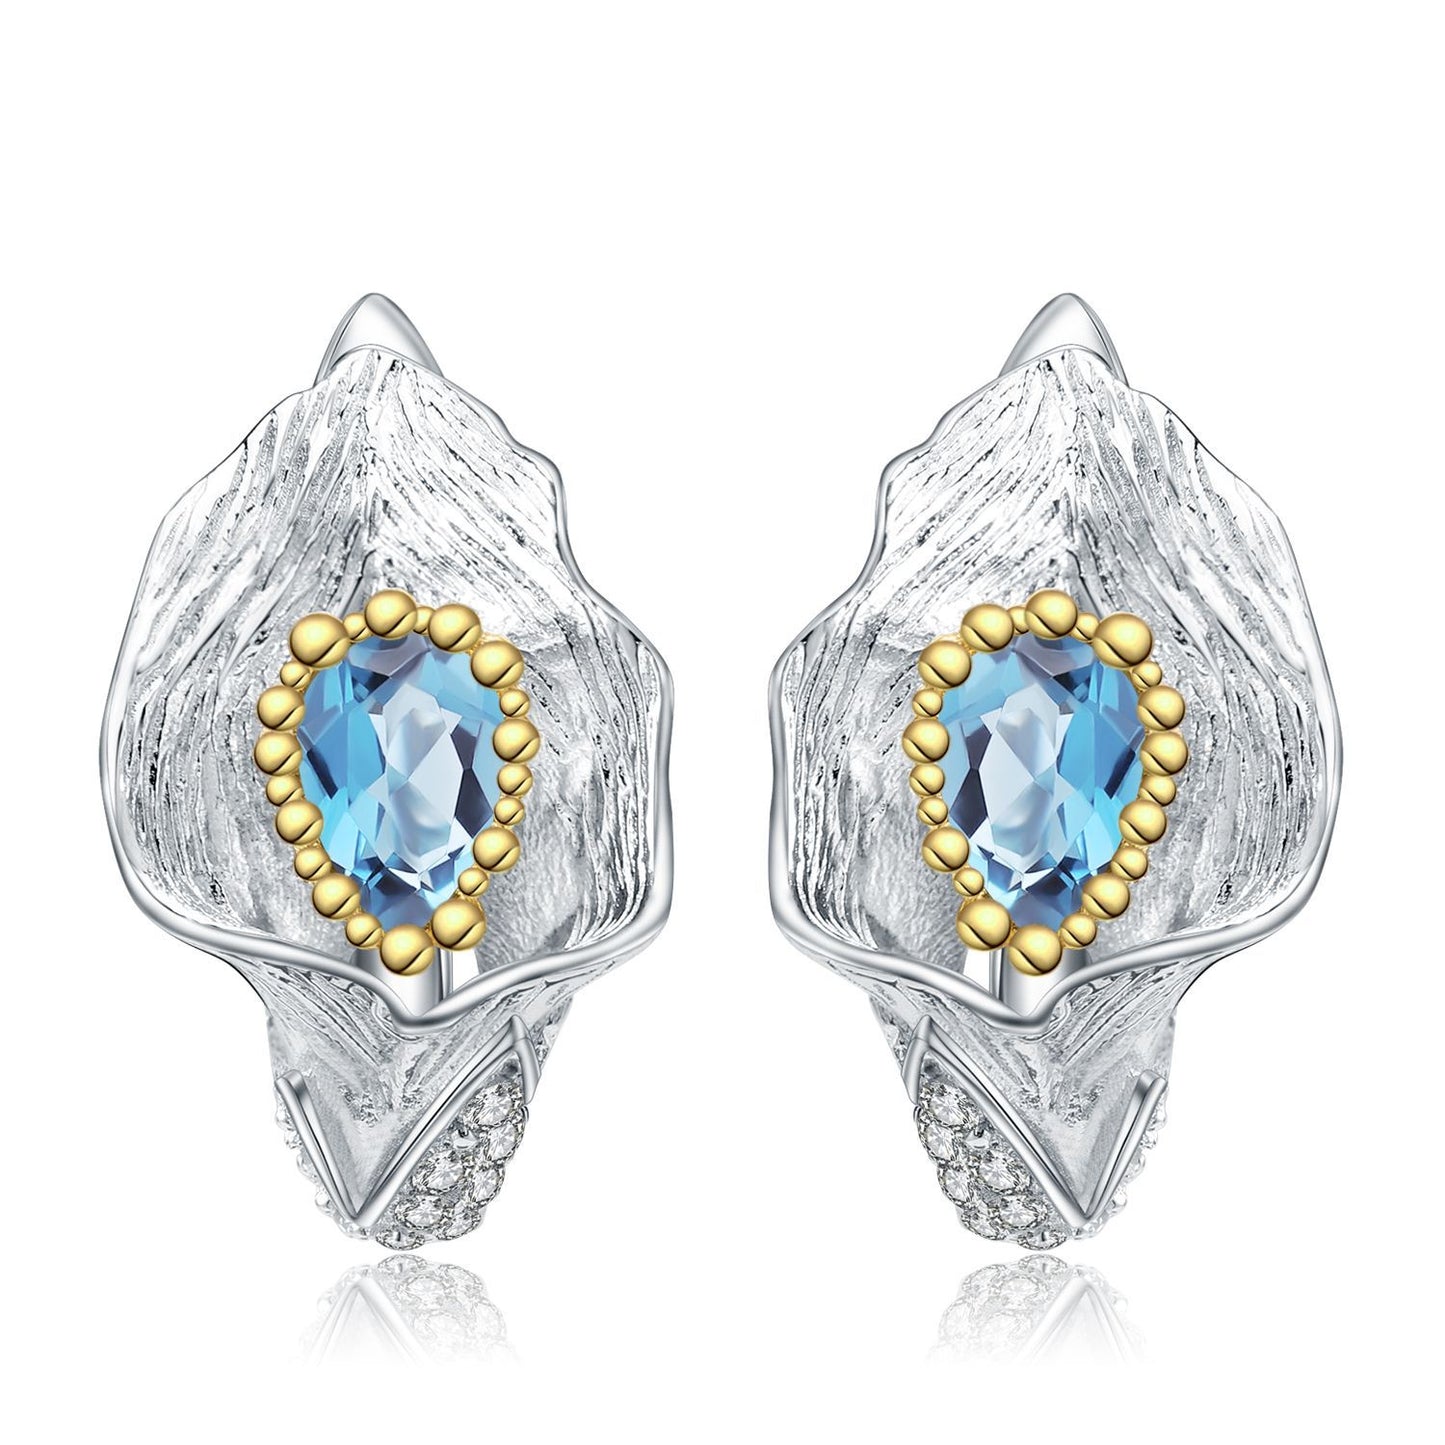 Italian Craft Vintage Desig Inlaid Natural Topaz Flower Silver Studs Earrings for Women